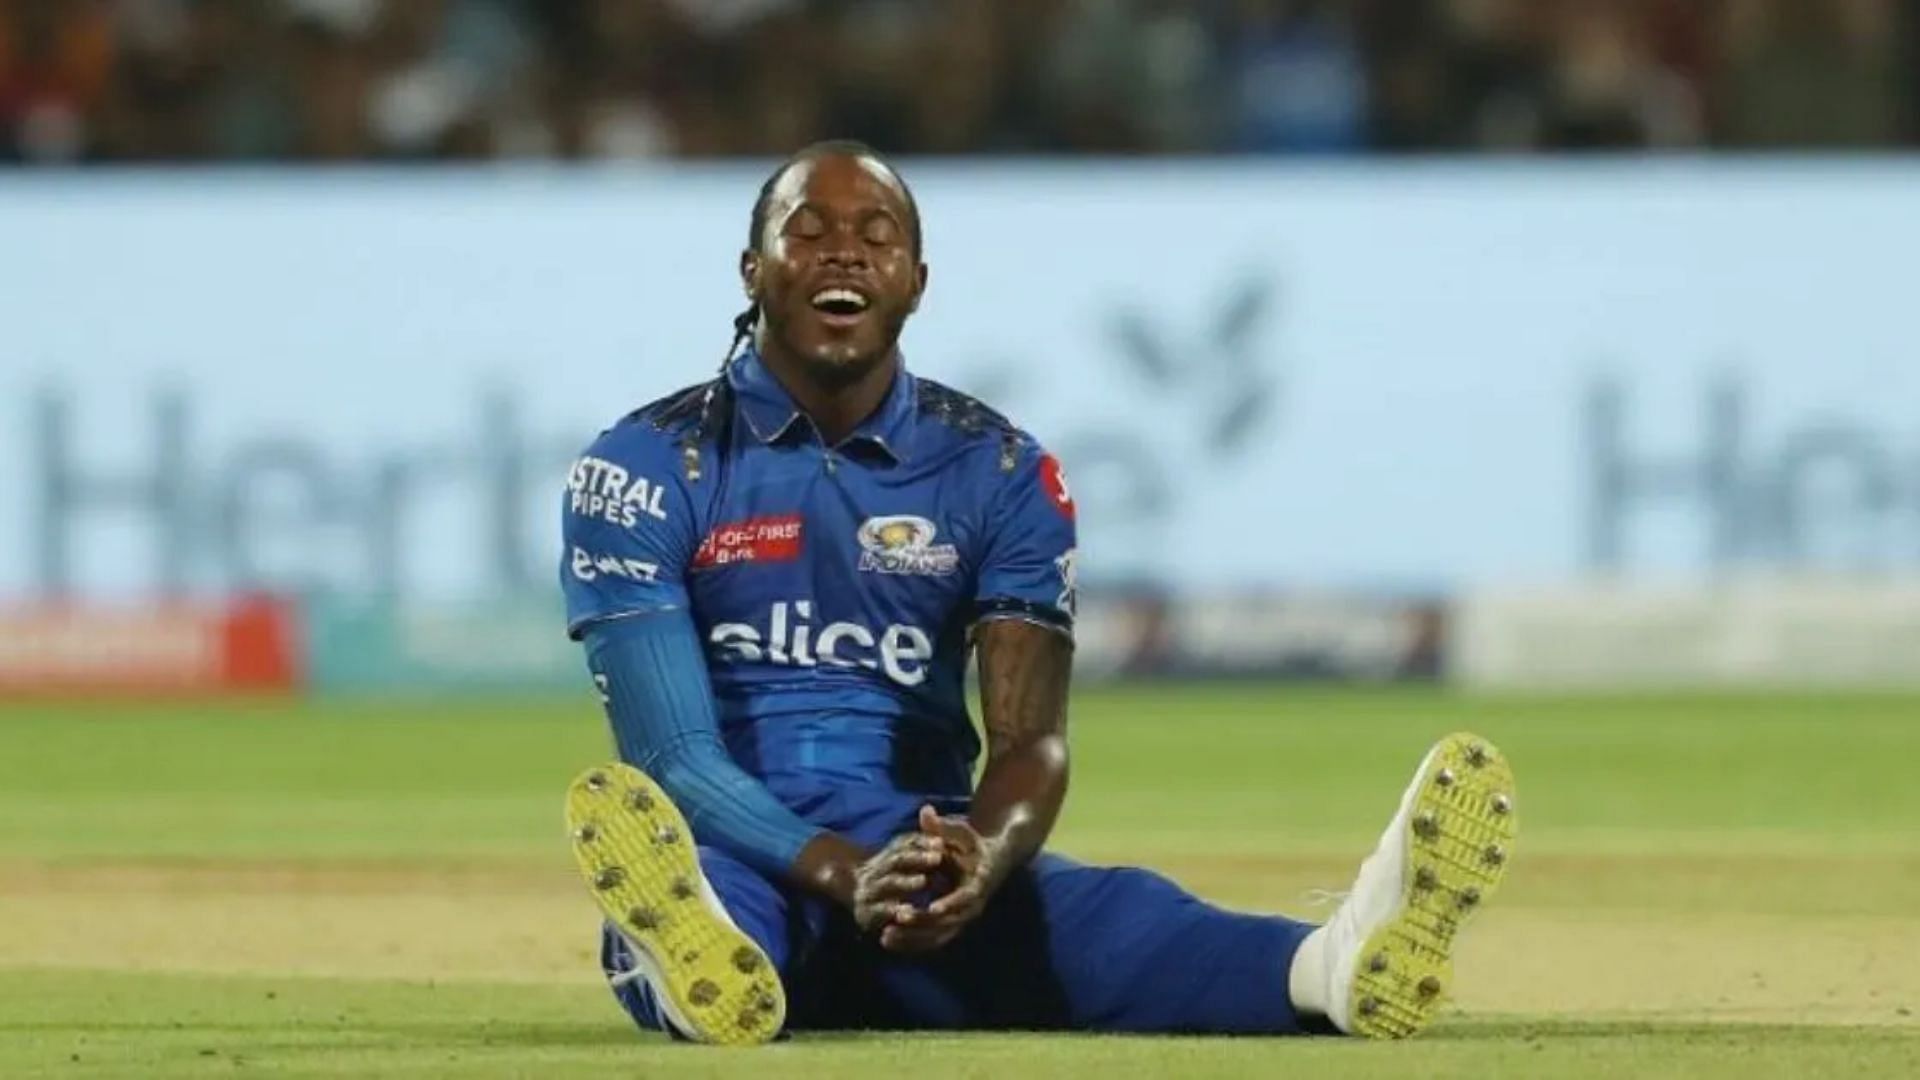 Can Jofra Archer rattle the GT batting lineup in his second game after injury?